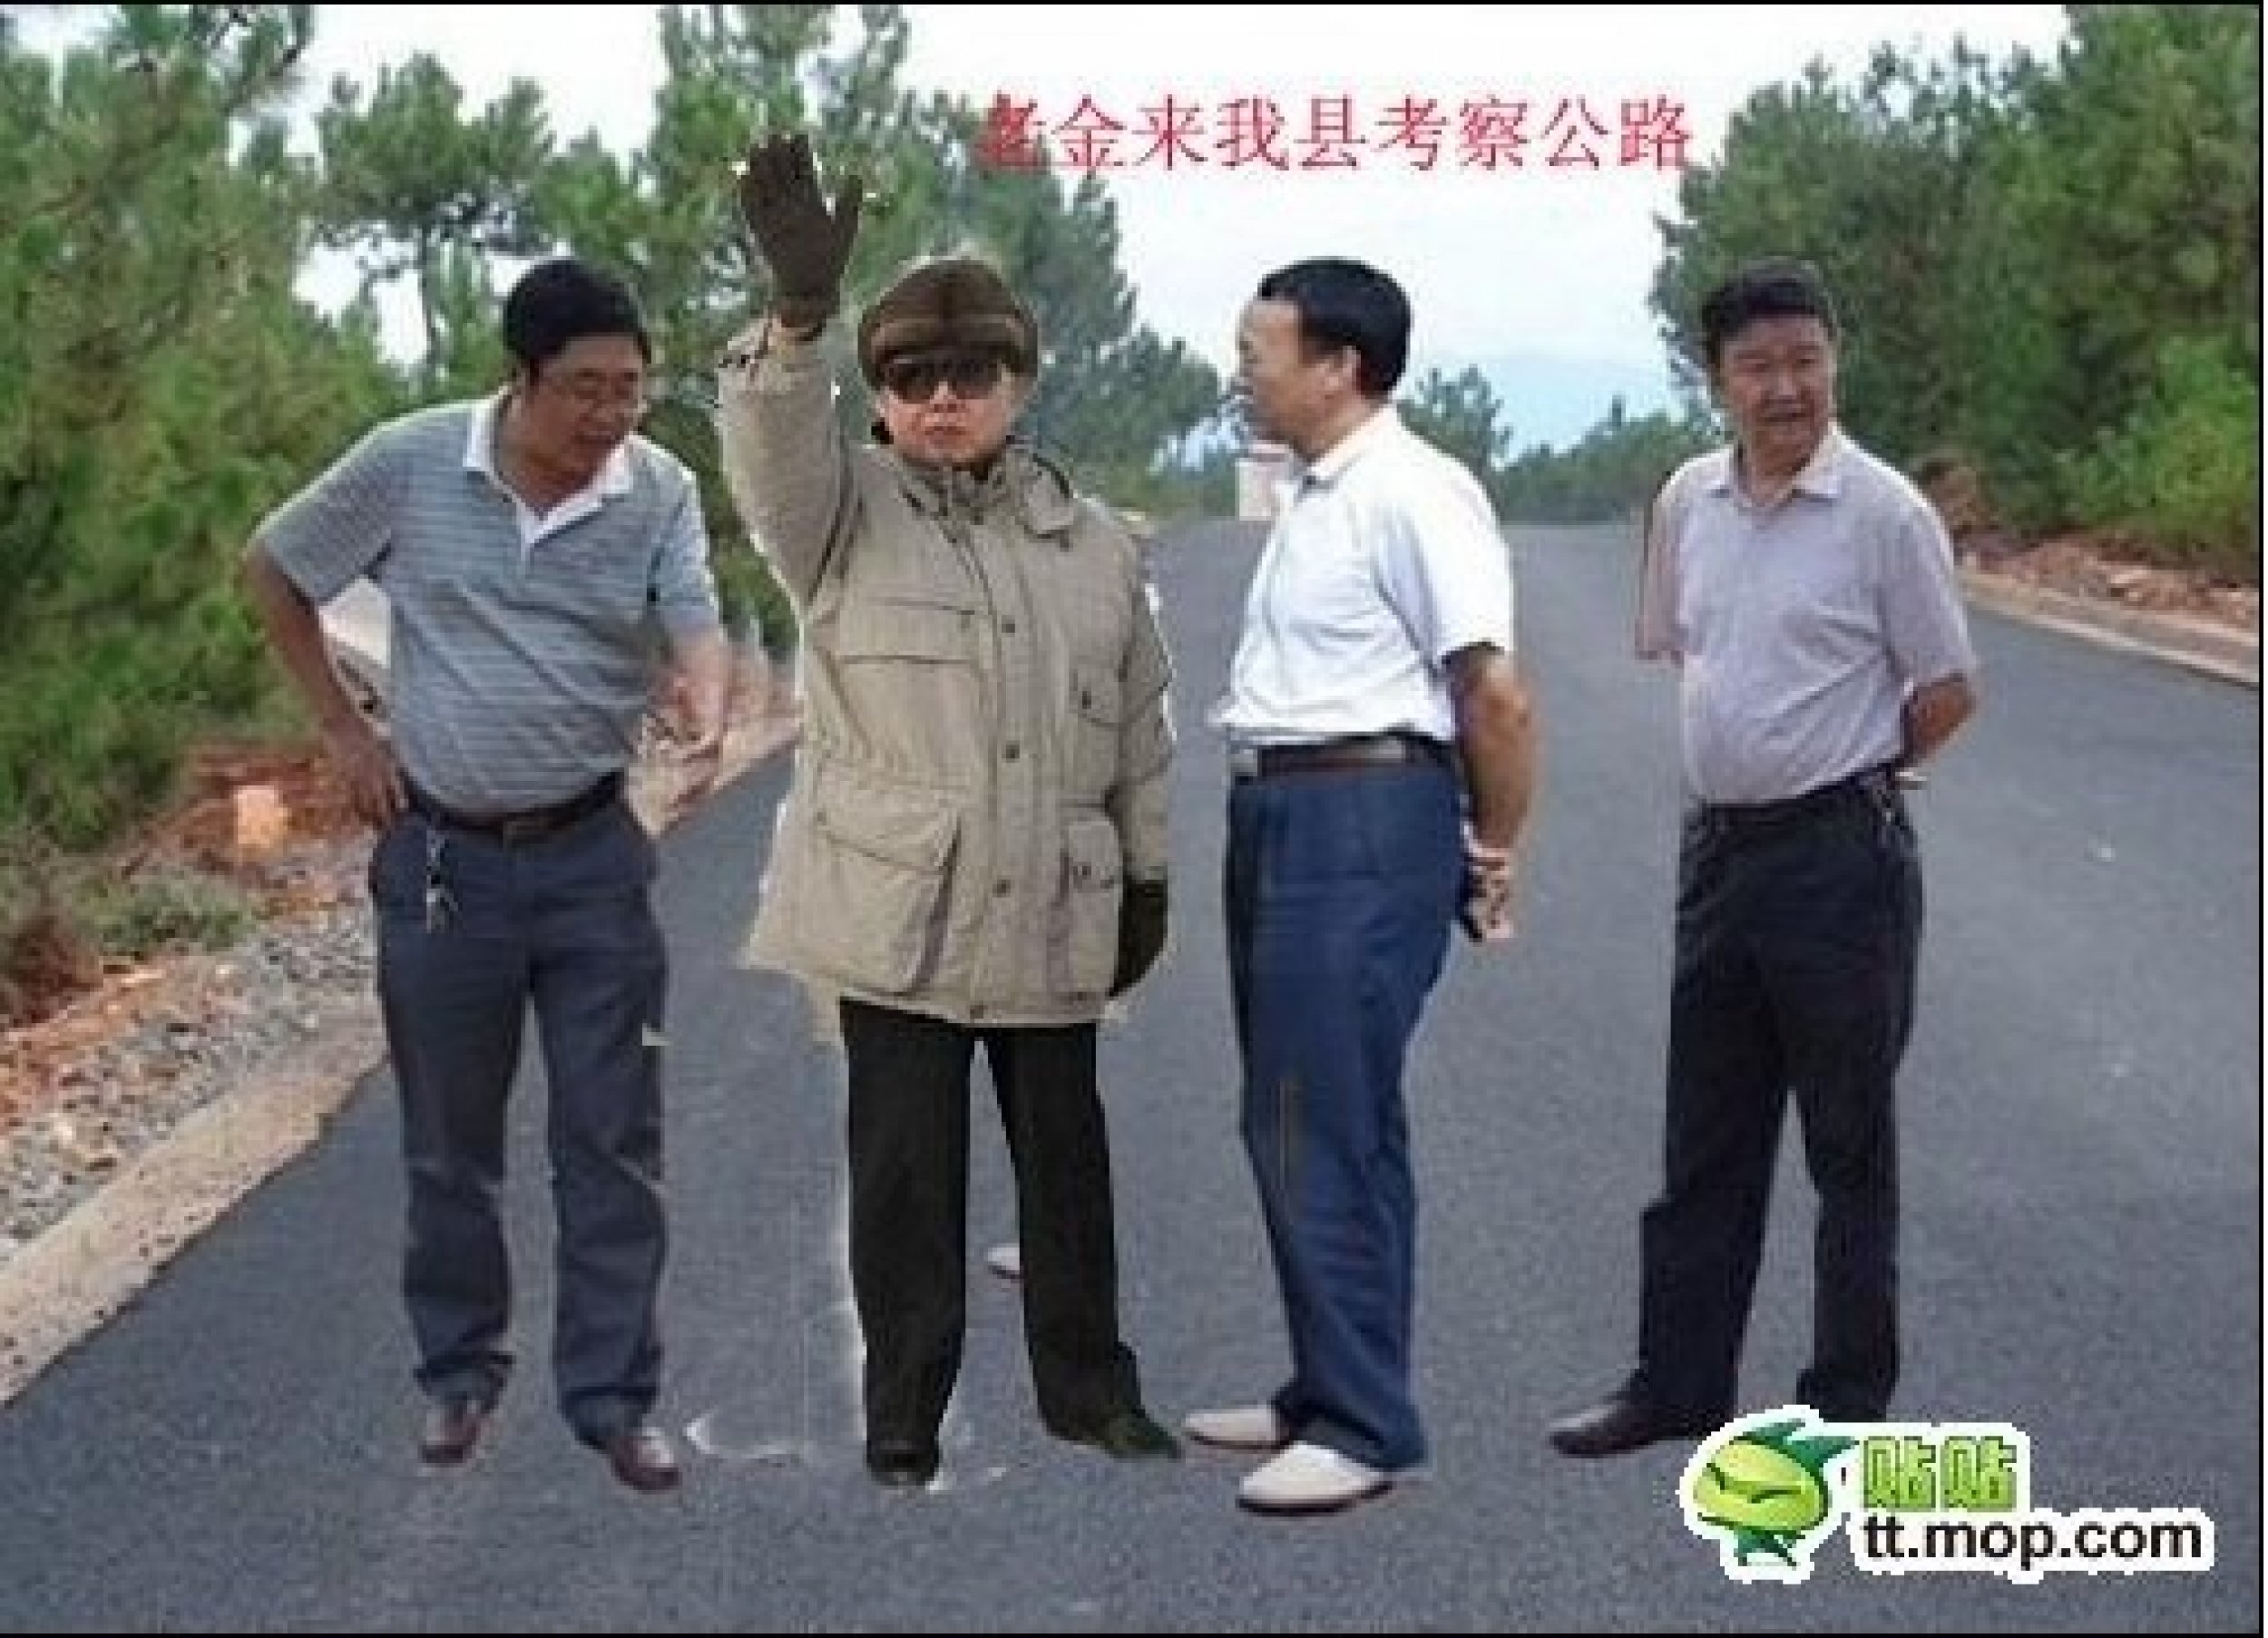 he 3 Chinese government officials are with the North Korean leader, Kim Jong Il.